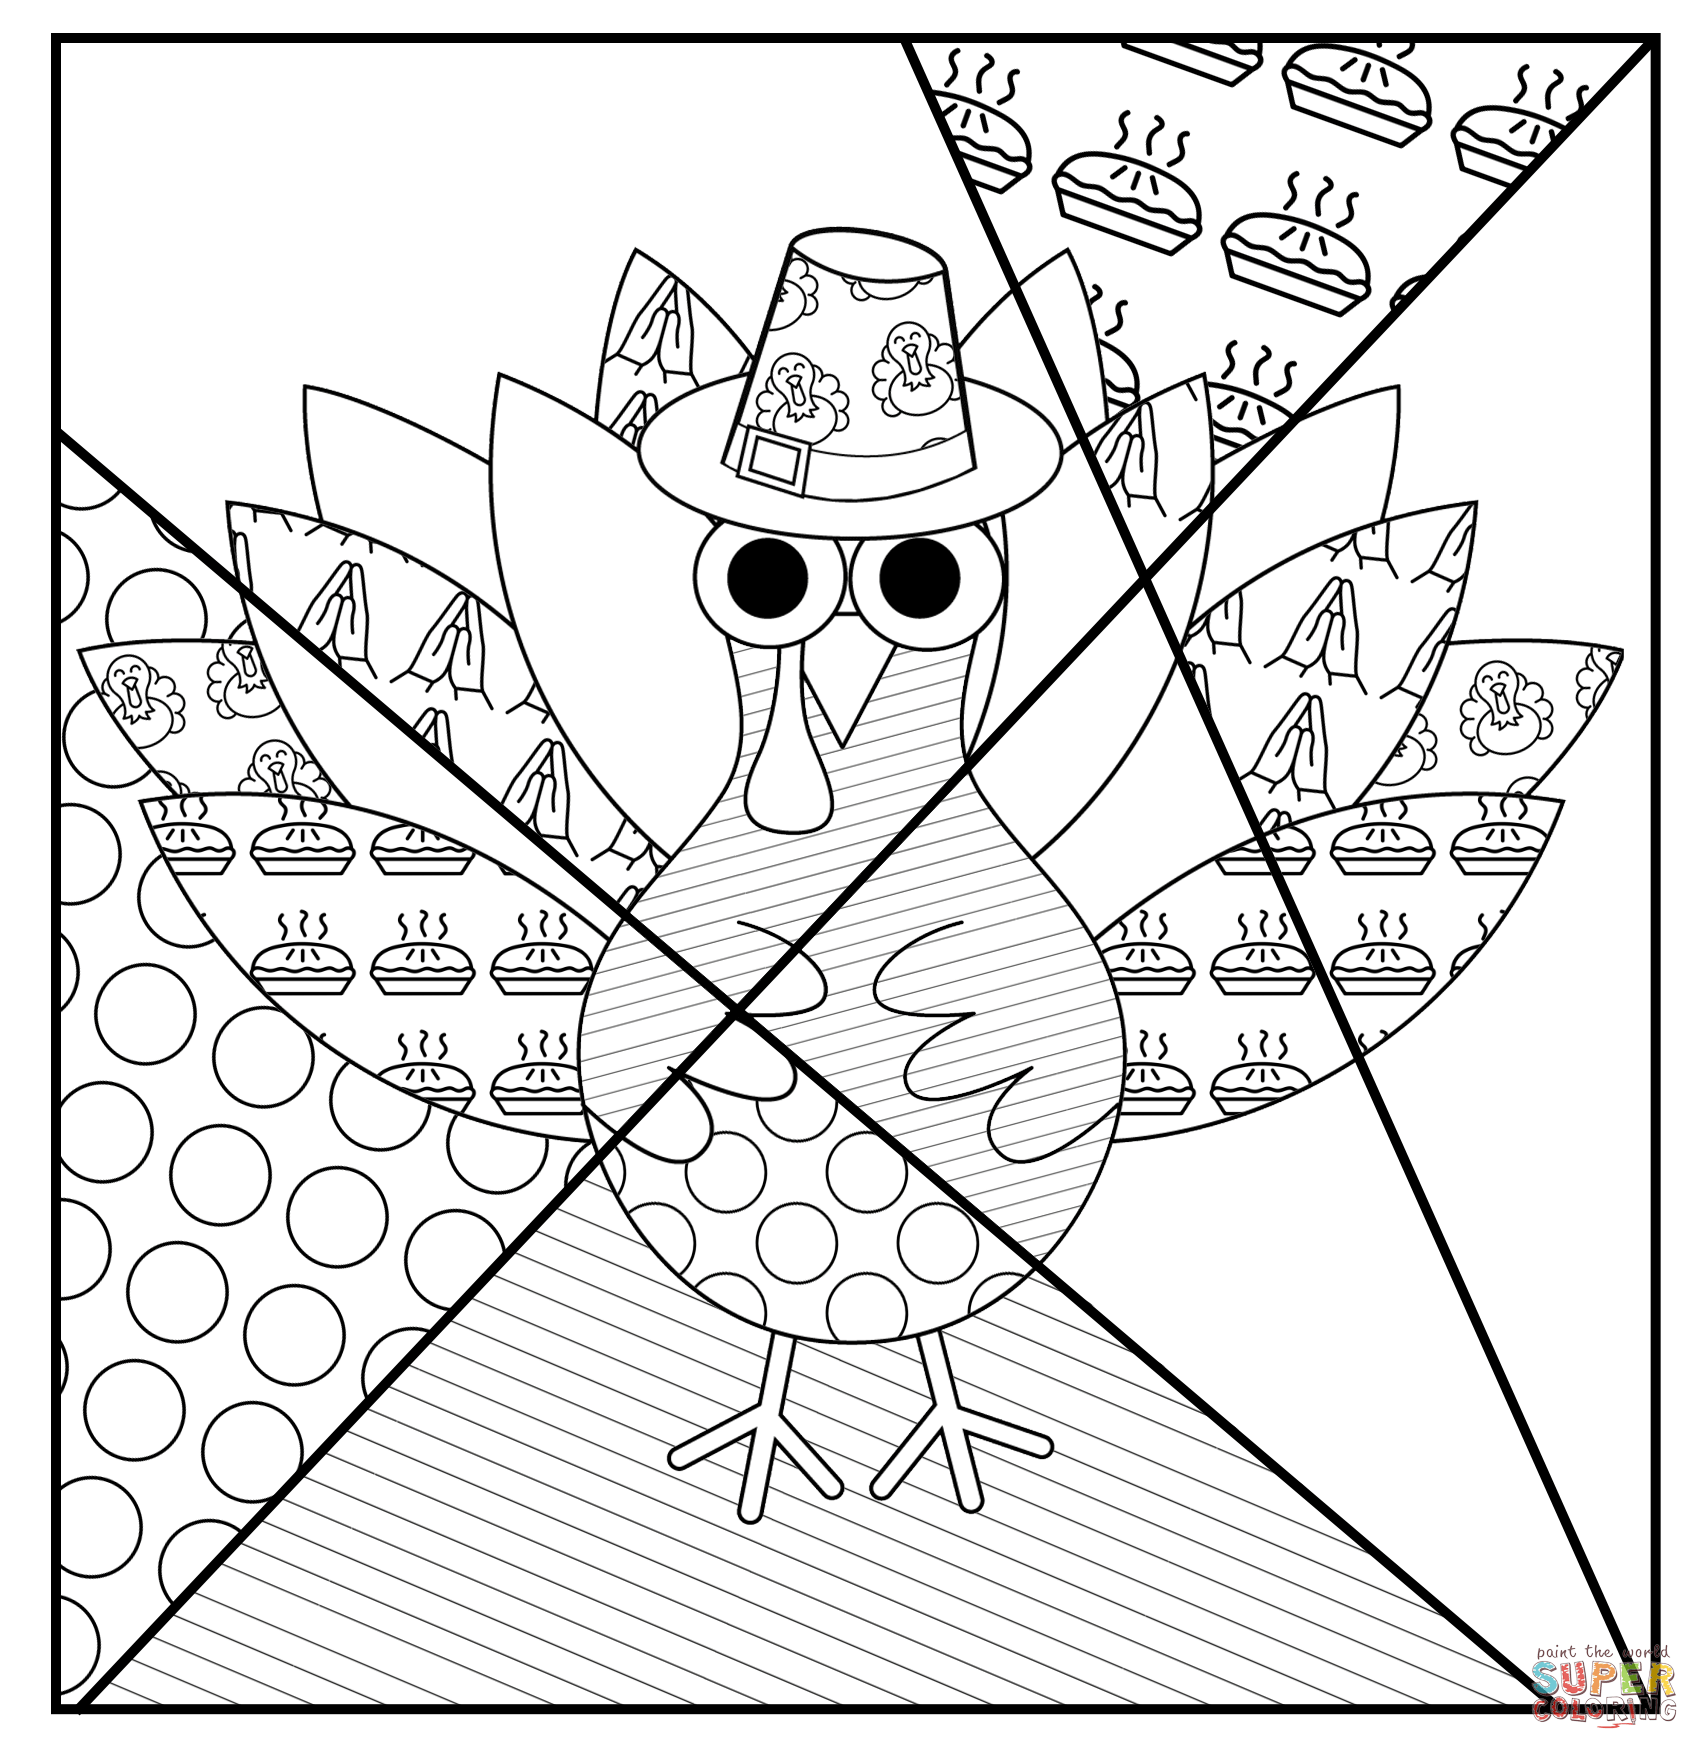 Thanksgiving turkey pop art coloring page free printable coloring pages